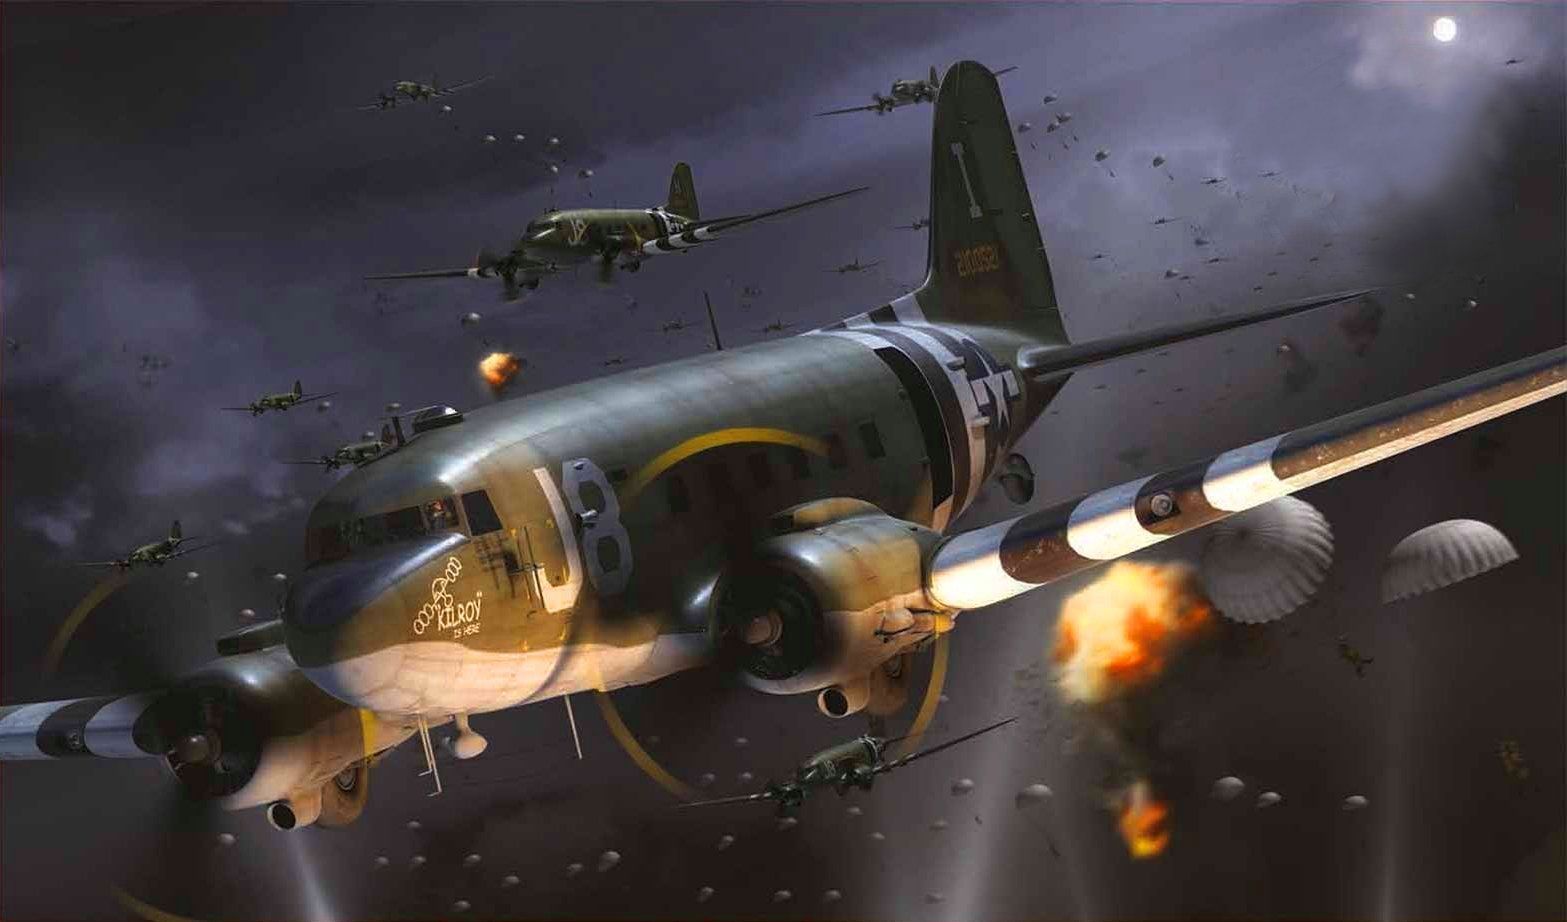 Douglas C 47 Skytrain D Day By Adam Tooby. Aircraft